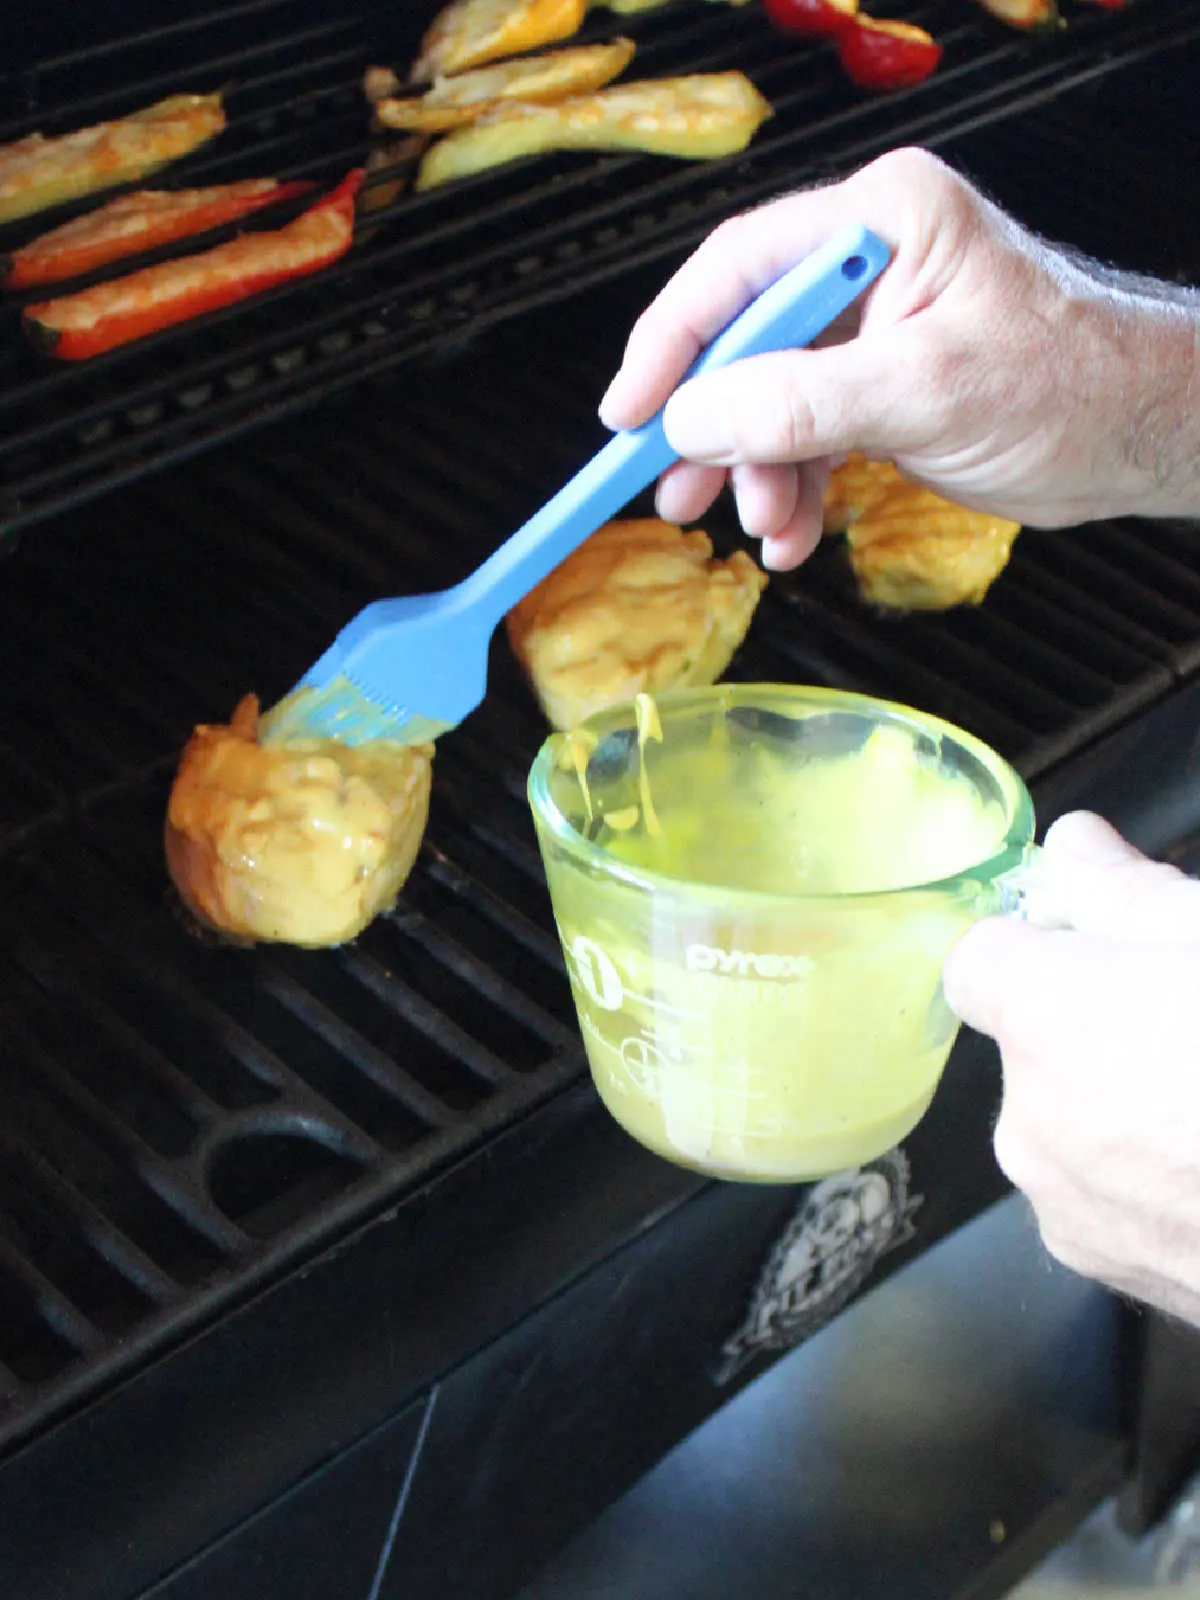 Brushing yellow mustard ranch sauce over chicken breasts on the pellet grill.